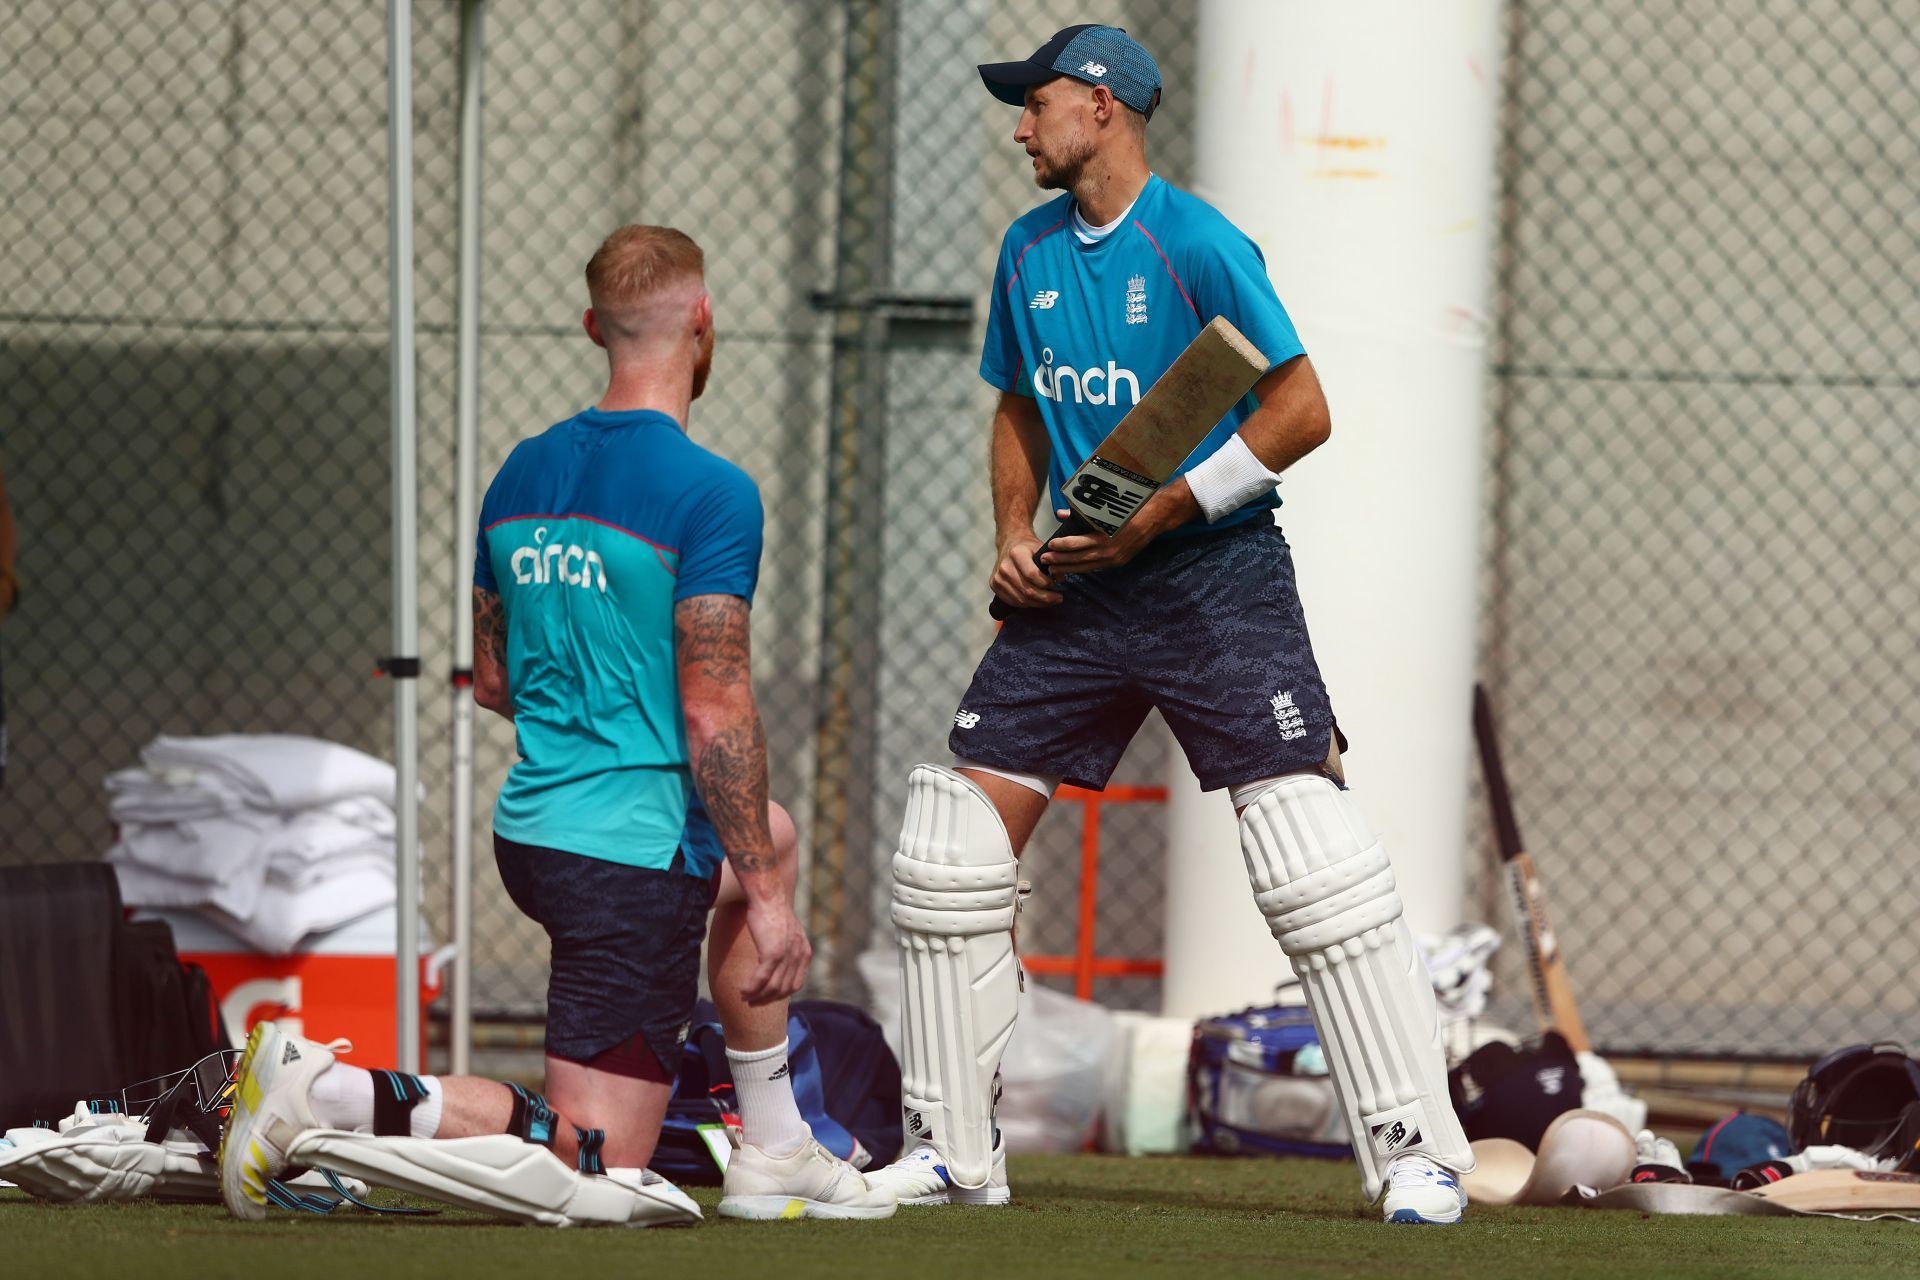 Joe Root and Ben Stokes are the backbone of the England batting unit